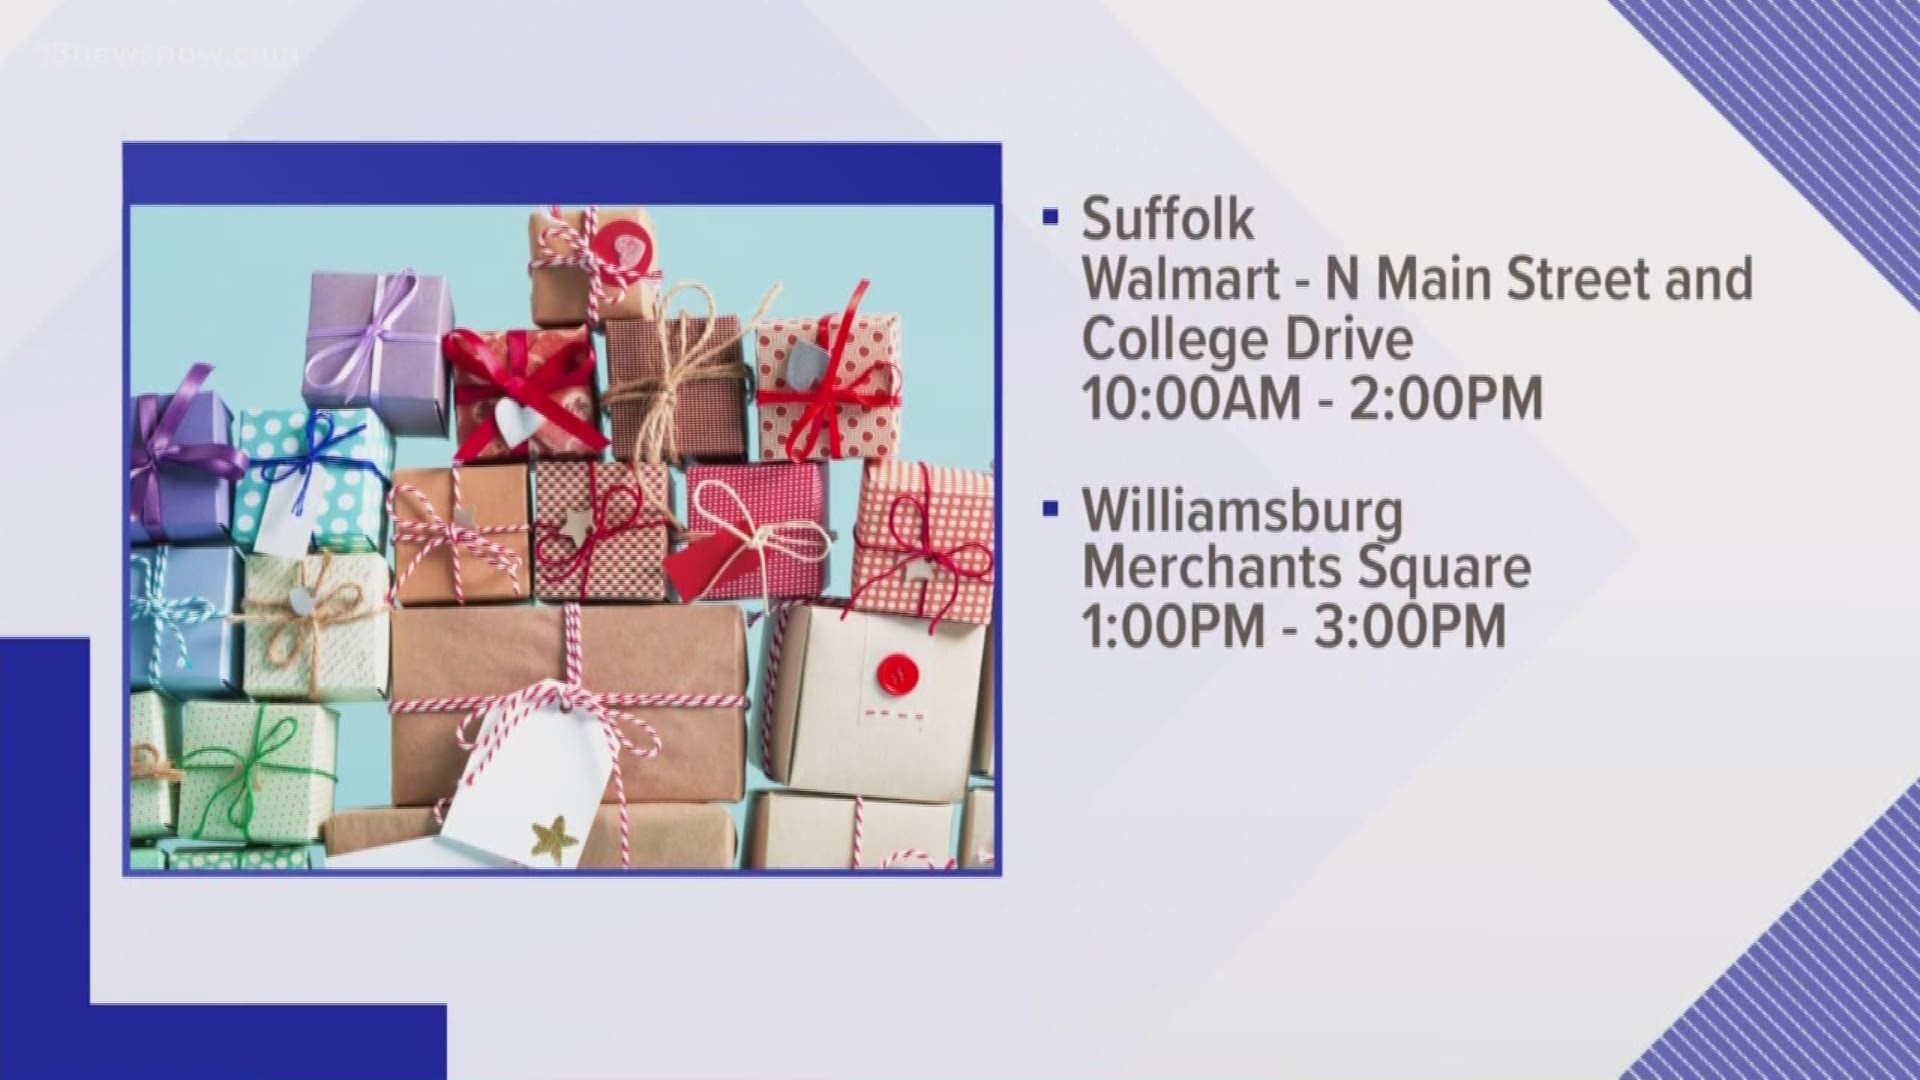 The Suffolk and Williamsburg police departments are holding toy drives this weekend.